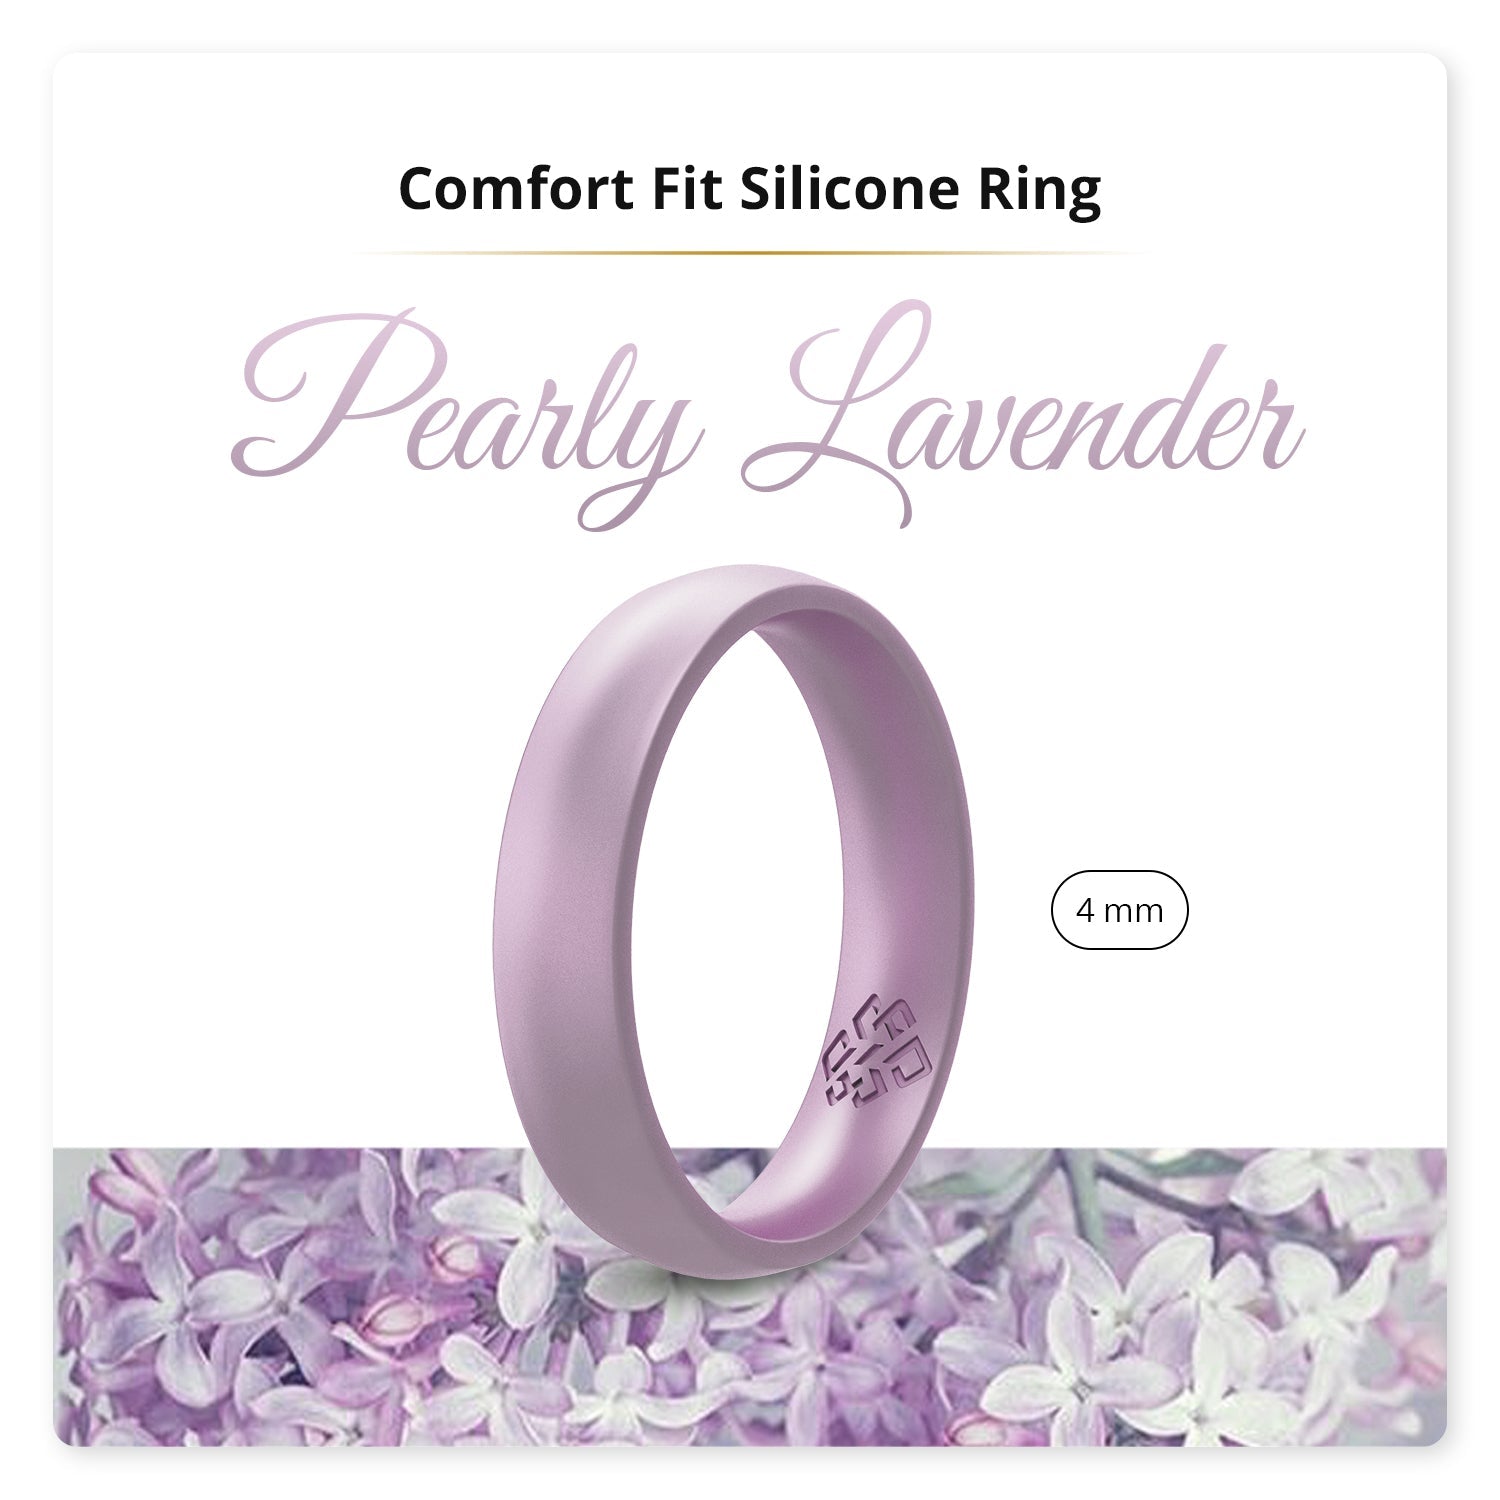 Knot Theory Dual Layer Mountain Silicone Ring For Men And Women - Lavender  Purple Size 8, Breathable Comfort Fit 6Mm Bandwidth